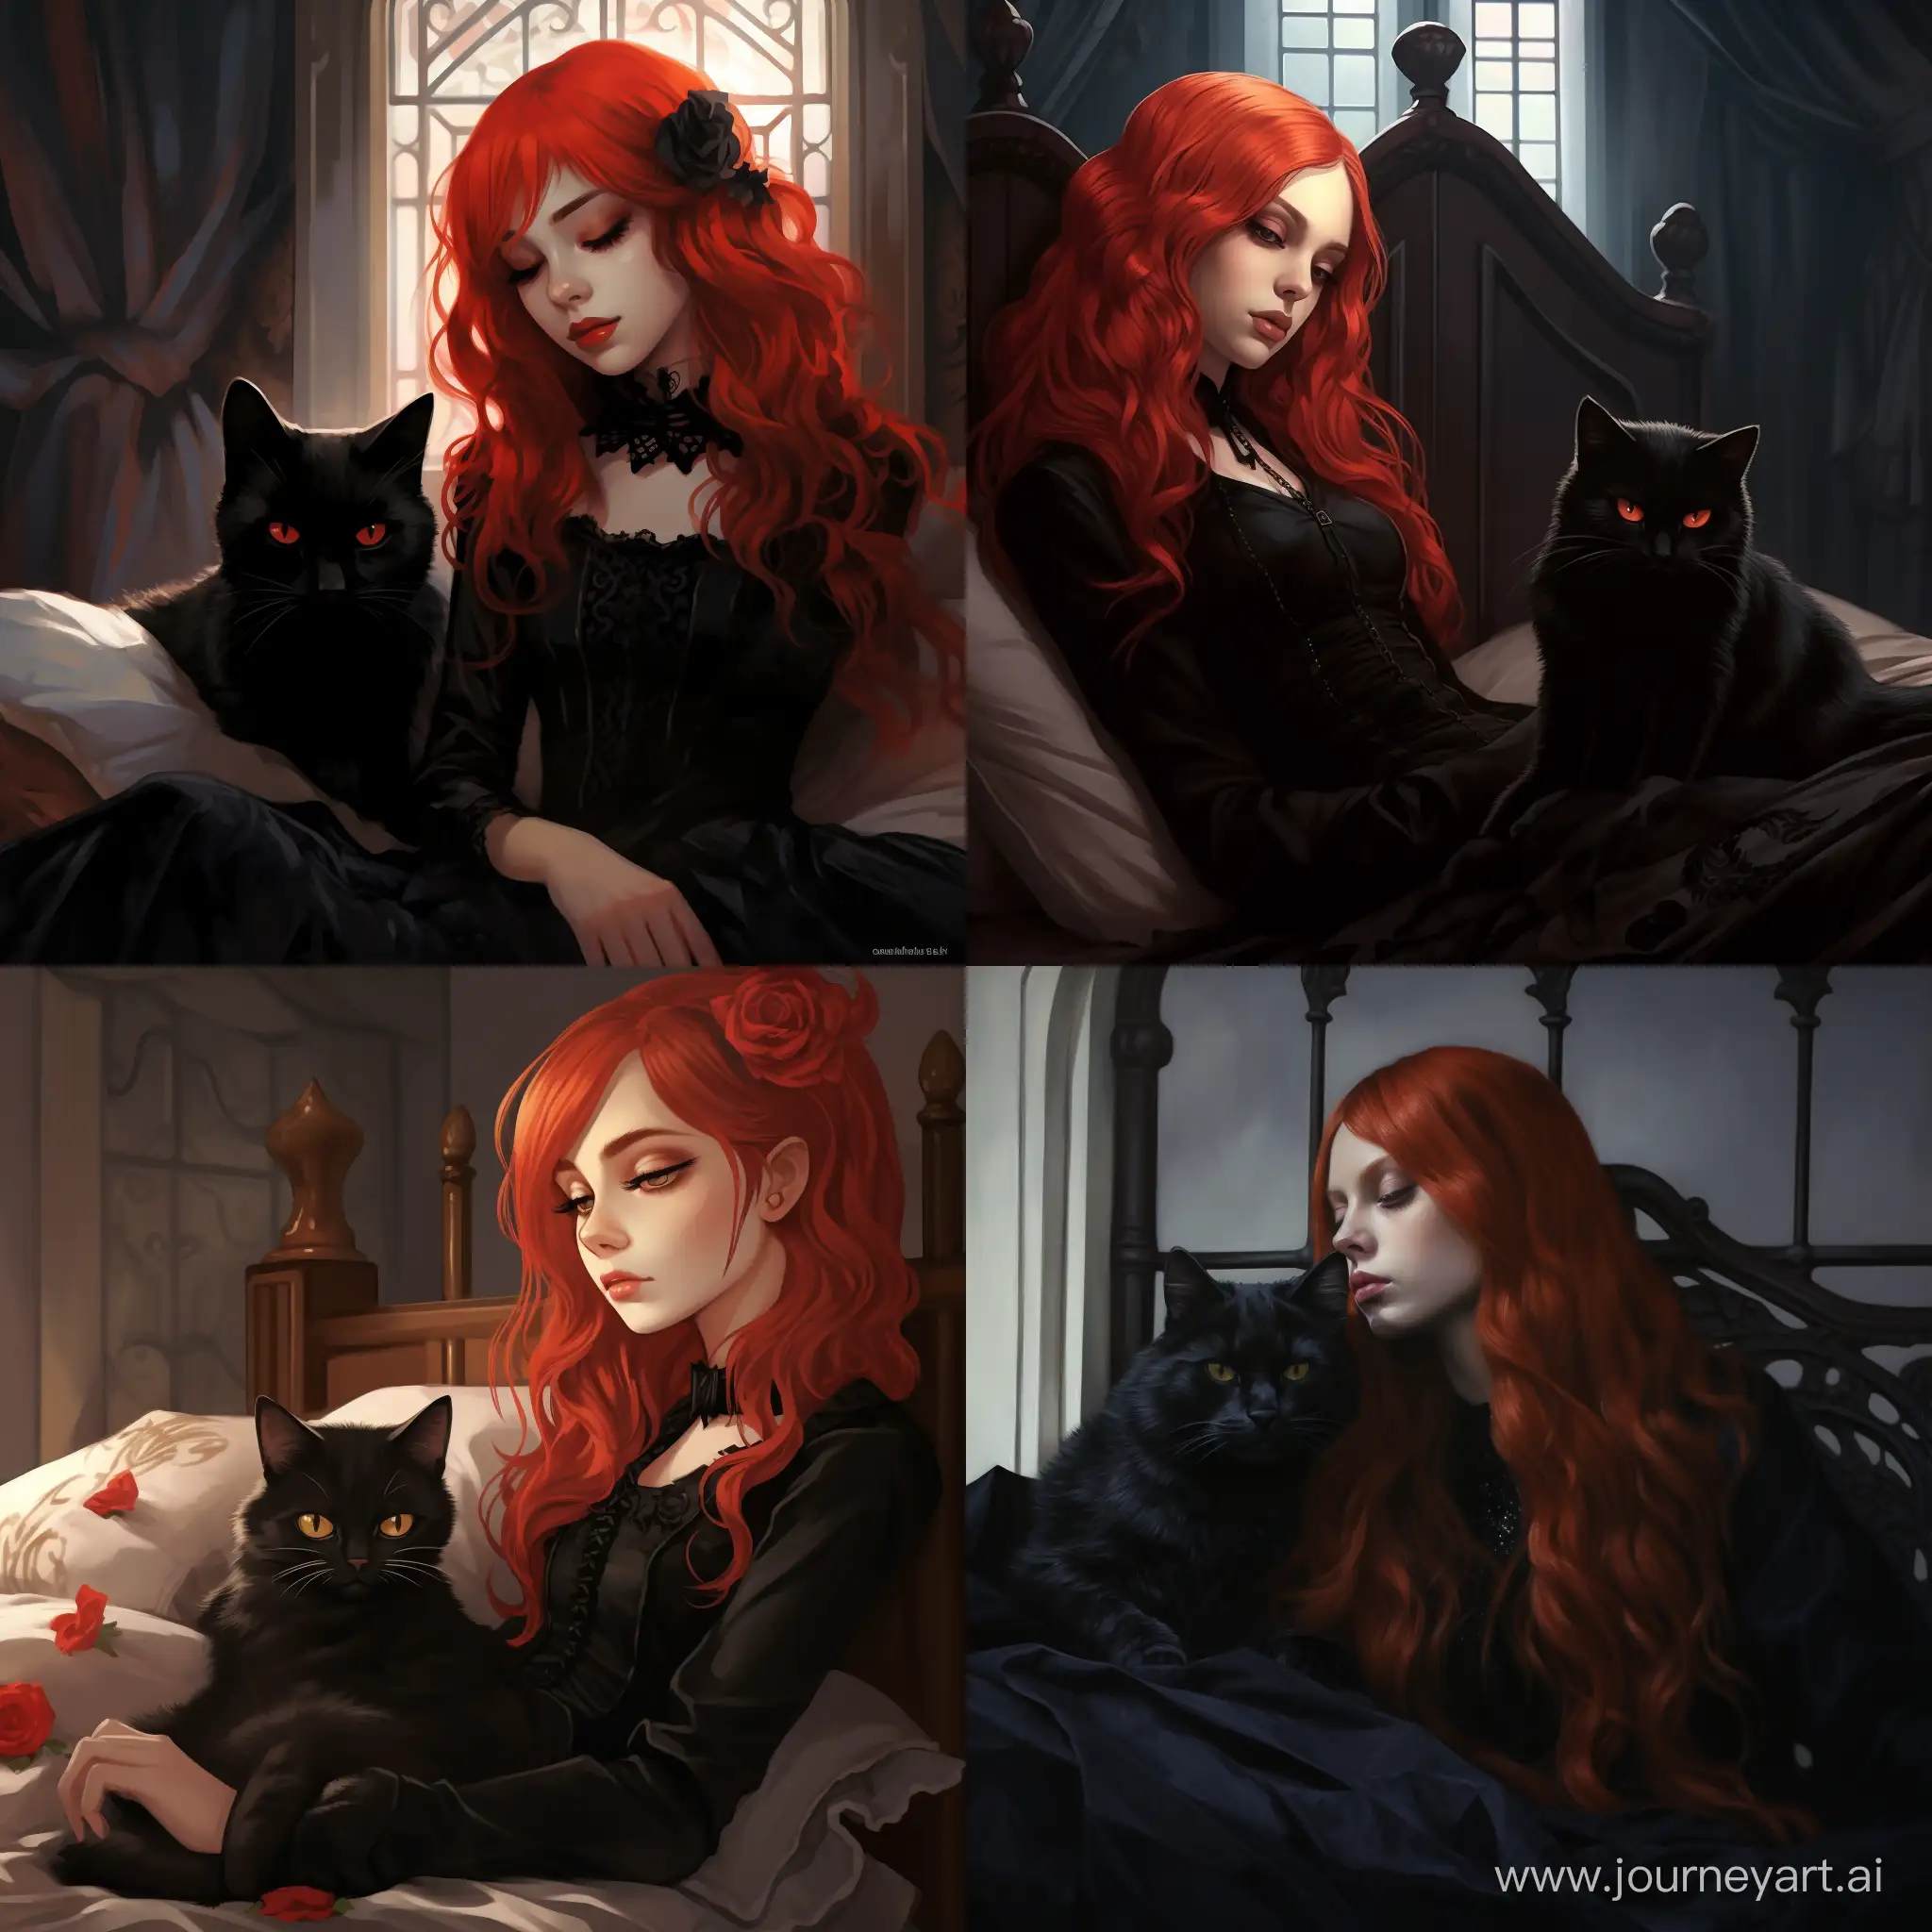 RedHaired-Gothic-Girl-Sleeping-with-Stylish-Cat